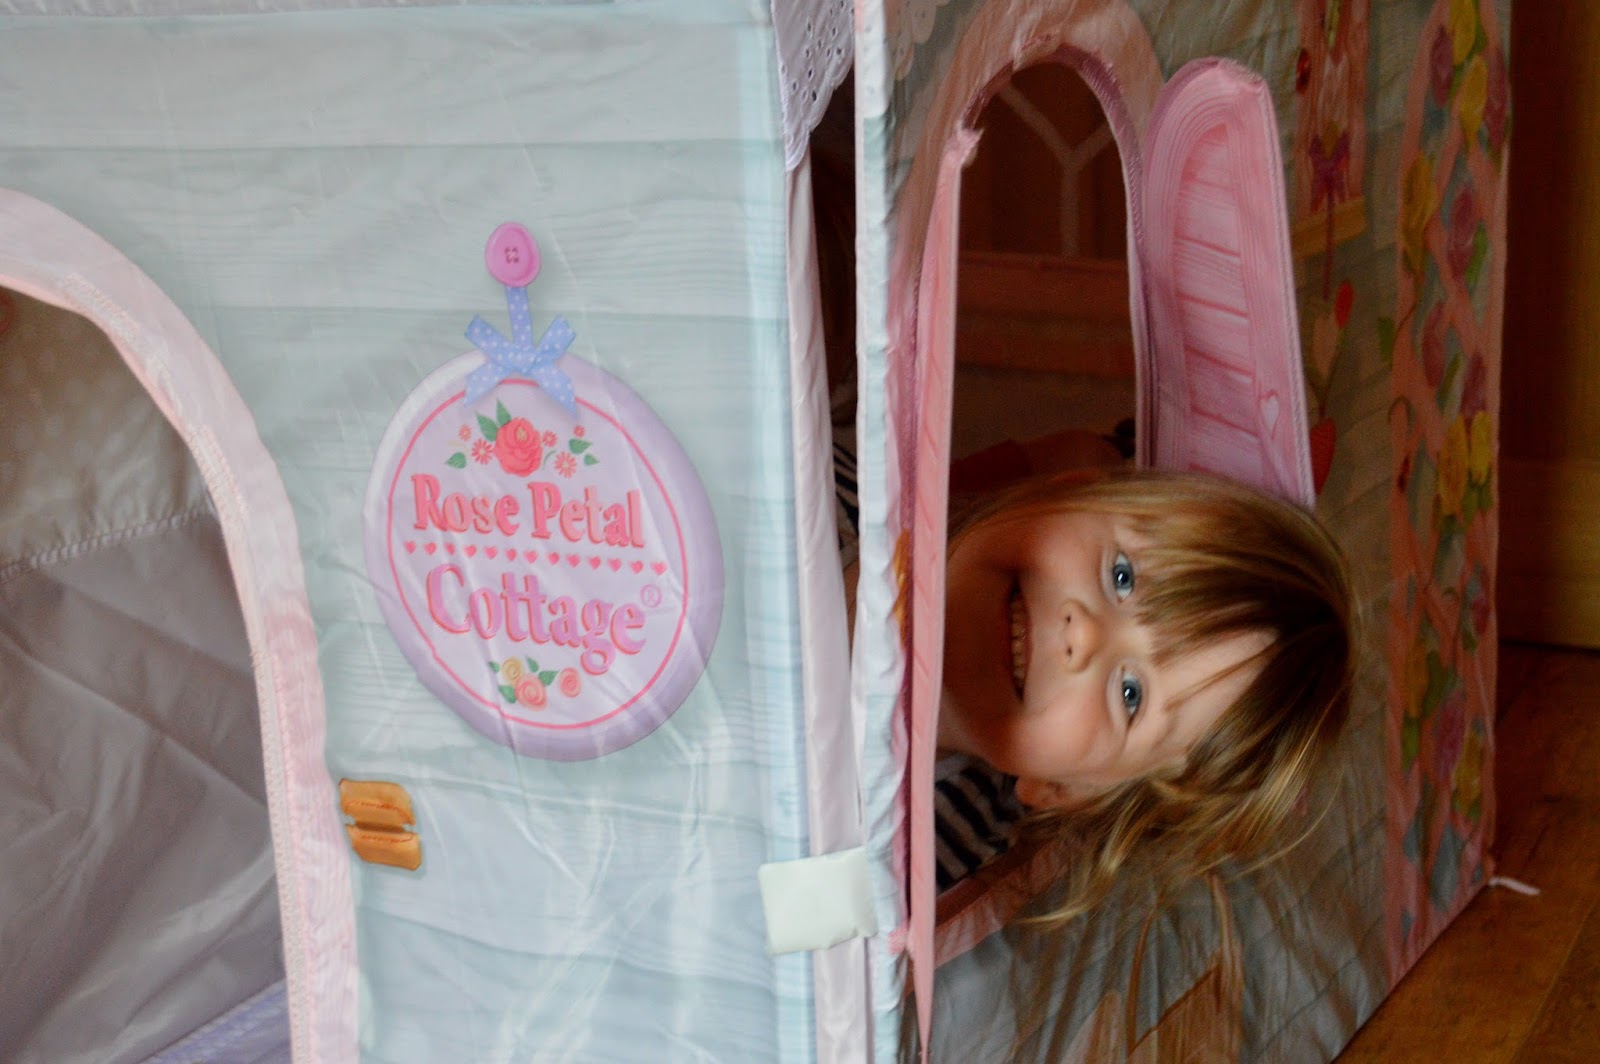 Dreamtown Rose Petal Cottage Review We Re Going On An Adventure